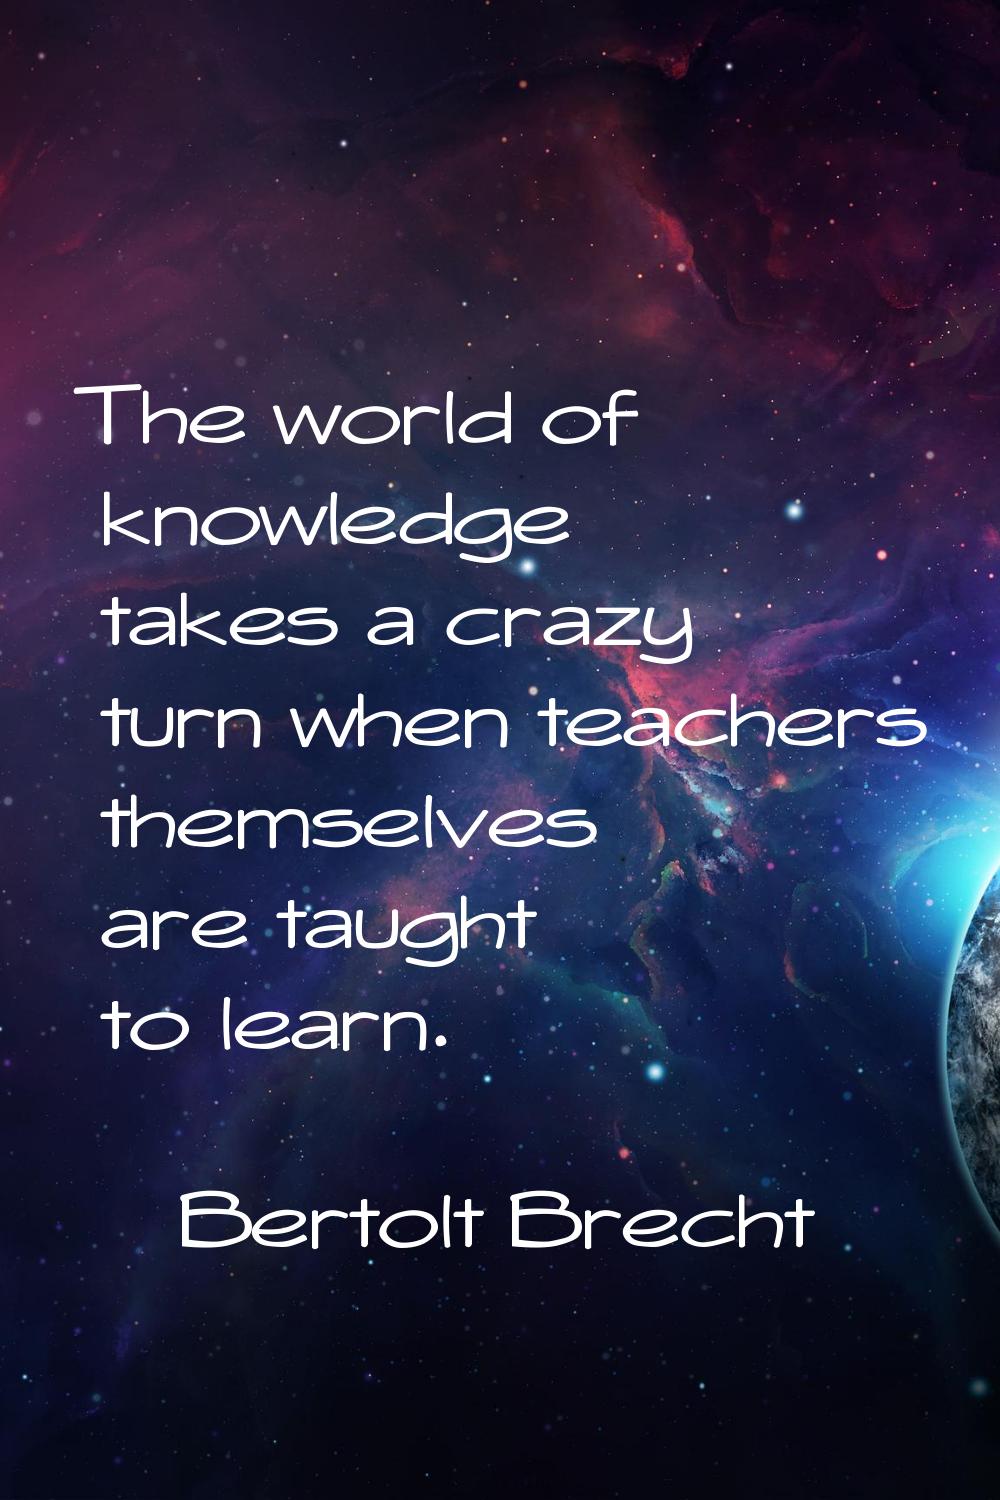 The world of knowledge takes a crazy turn when teachers themselves are taught to learn.